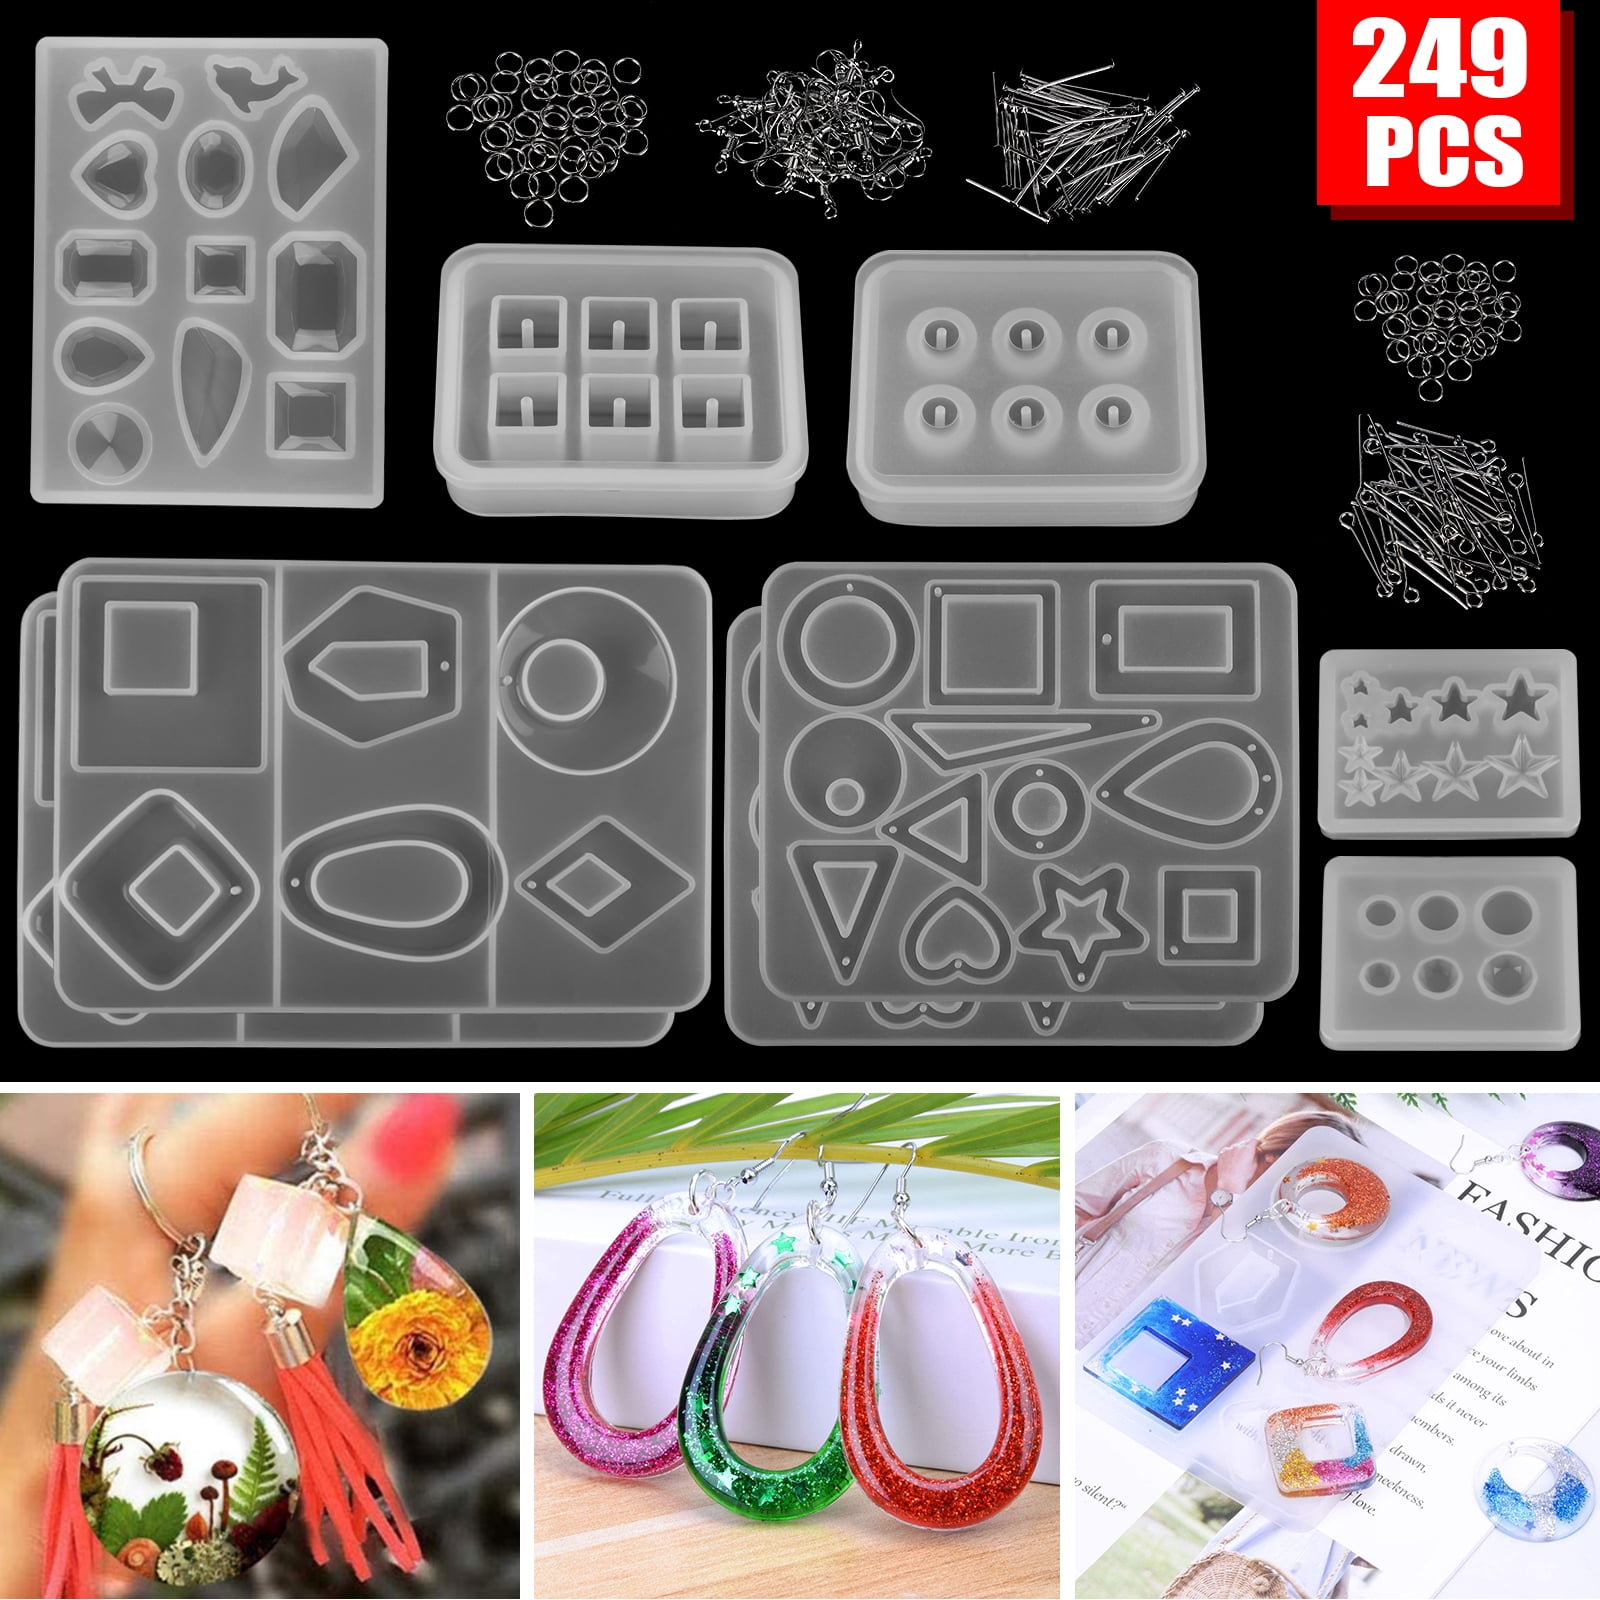 Resin Casting Mold Kit for Jewellery Making DIY Craft Silicone Moulds Epoxy Earring Resin Molds Gifts for Women Girls Pack of 8 Include Earring Hooks, Jump Rings,Eye Pins